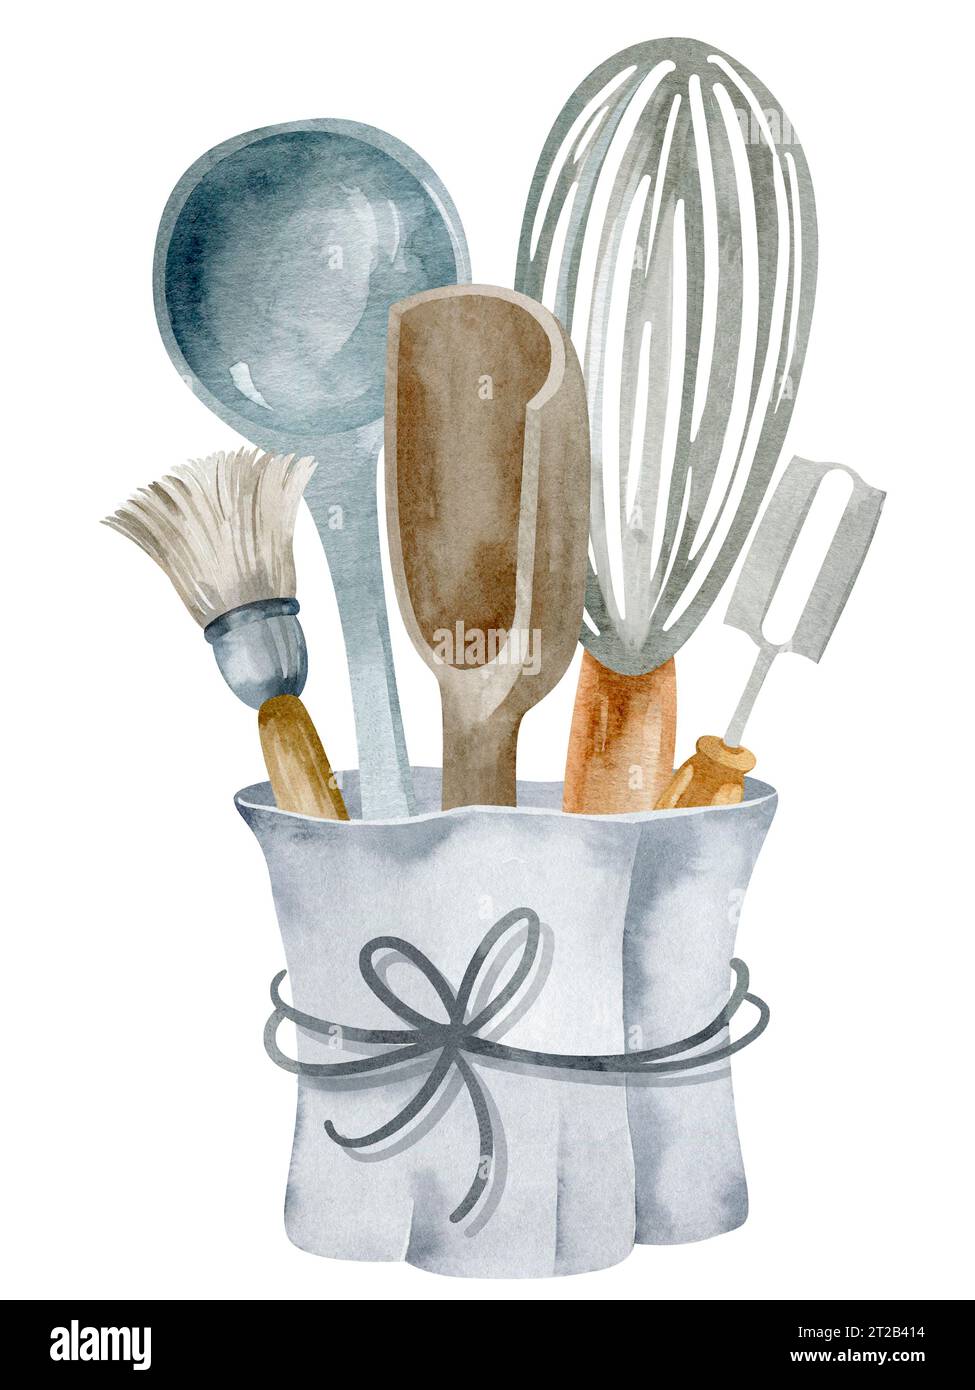 Watercolor Baking Clipart, Baking Supplies, Home Bakery Logo, Cooking  Elements, Culinary Clipart, Kitchen Utensils, Baking Tools Watercolor 